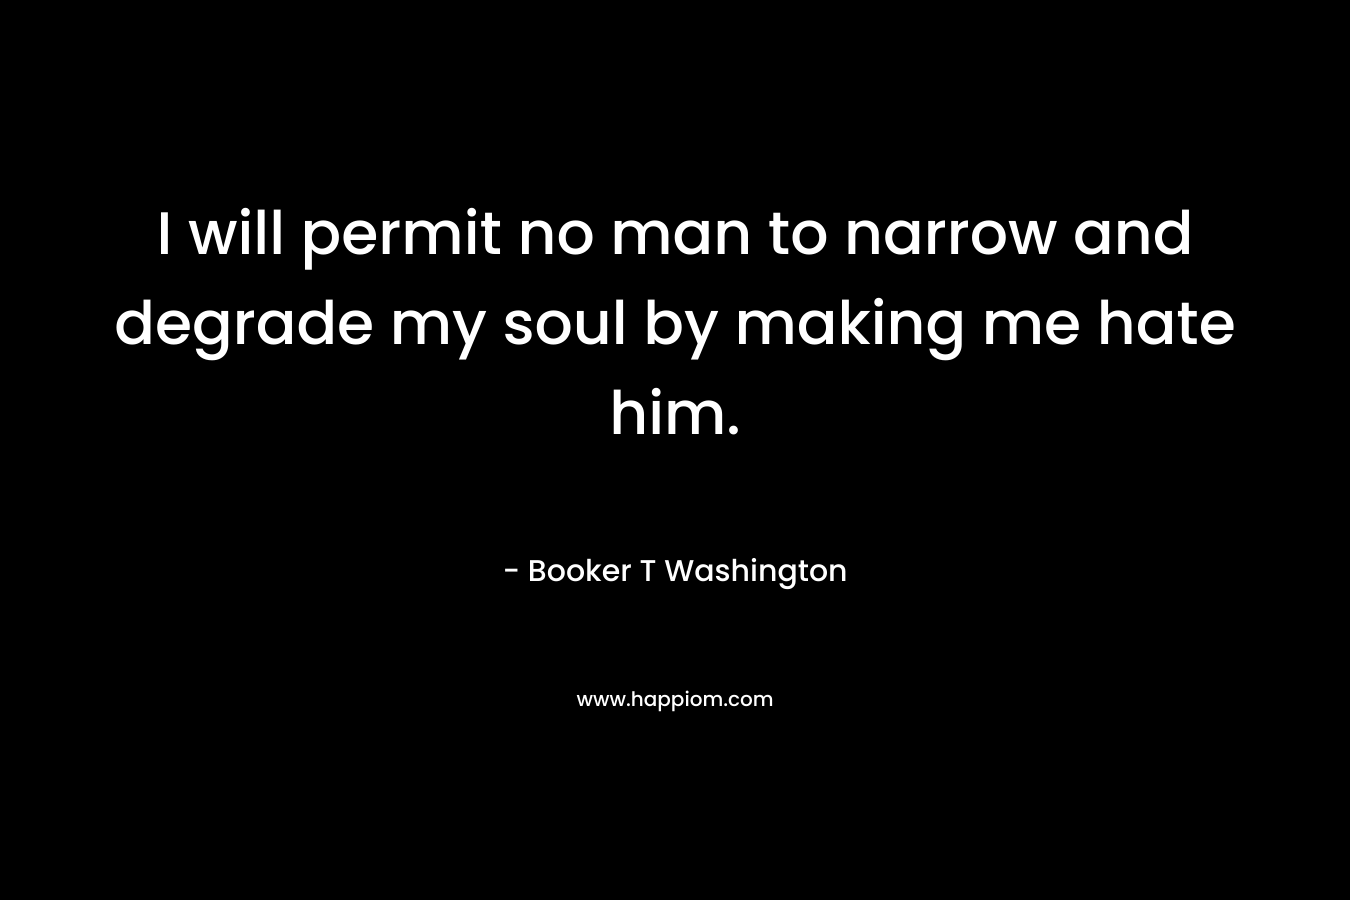 I will permit no man to narrow and degrade my soul by making me hate him. – Booker T Washington